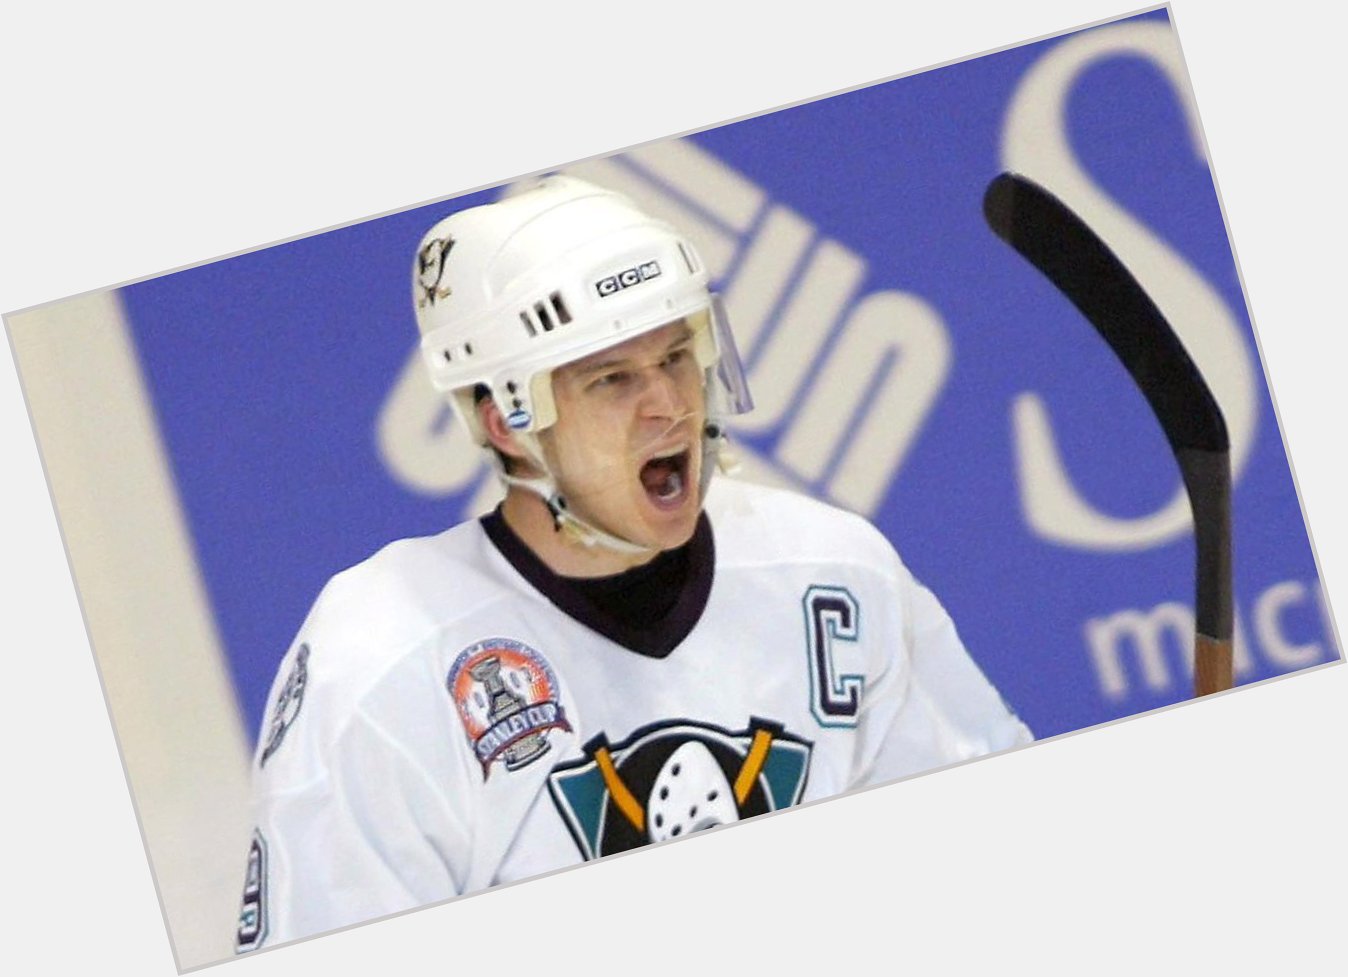 Happy 46th Birthday to Paul Kariya! He recorded 5 points in 6 career games on his birthday (1 G, 4 A). 